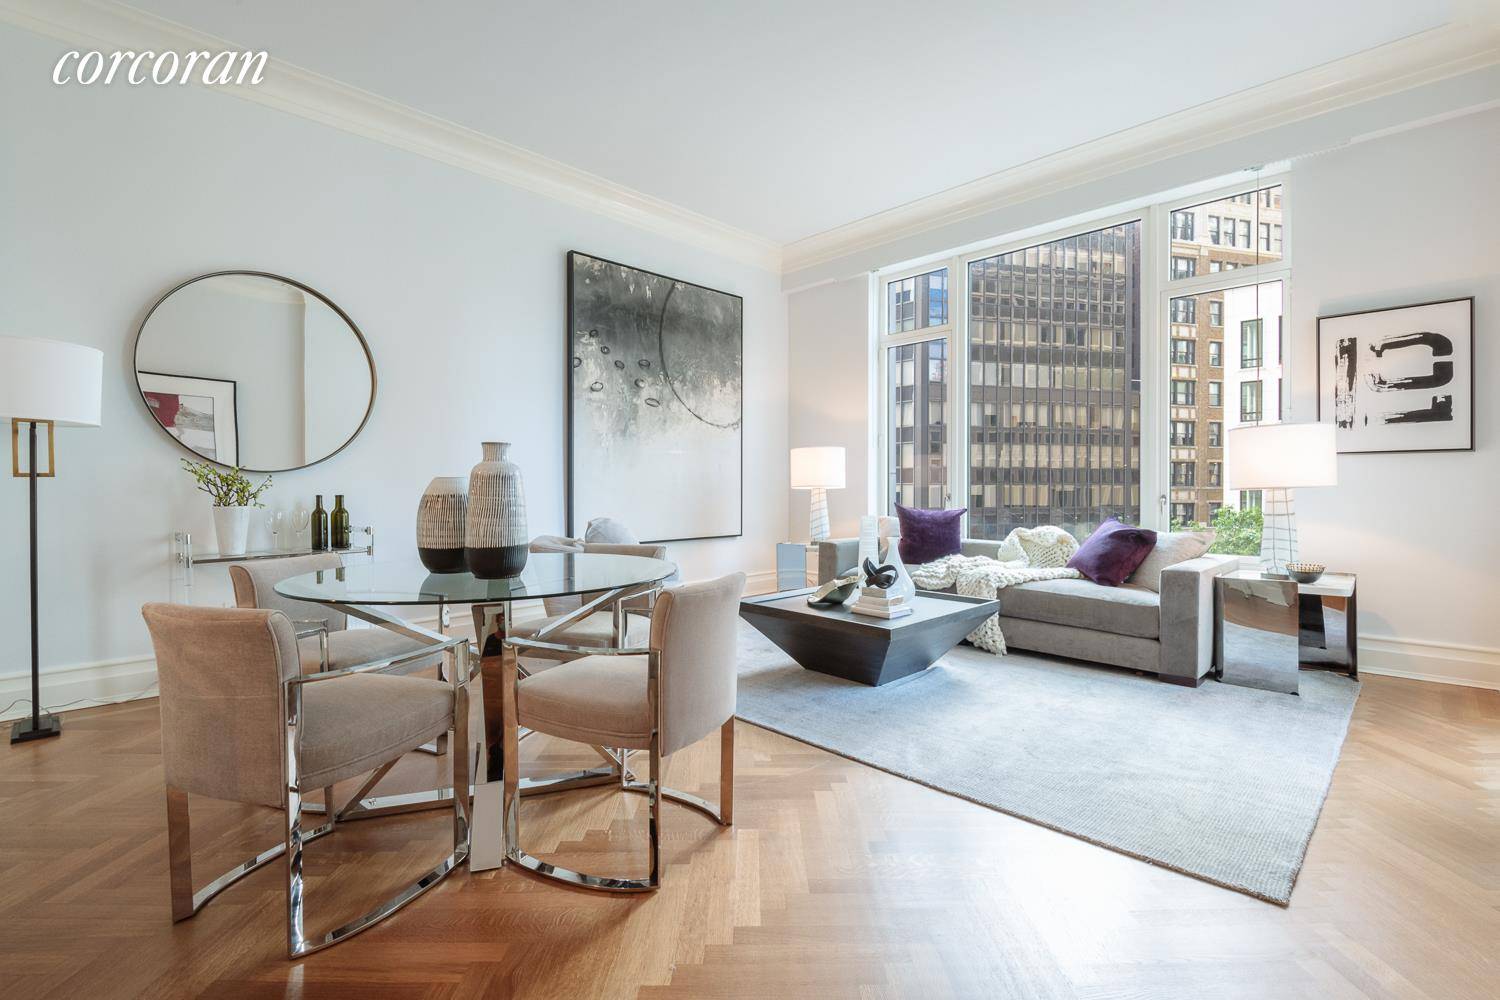 Located at 15 Central Park West in Manhattan's premiere condominium, this spacious two bedroom and 2.